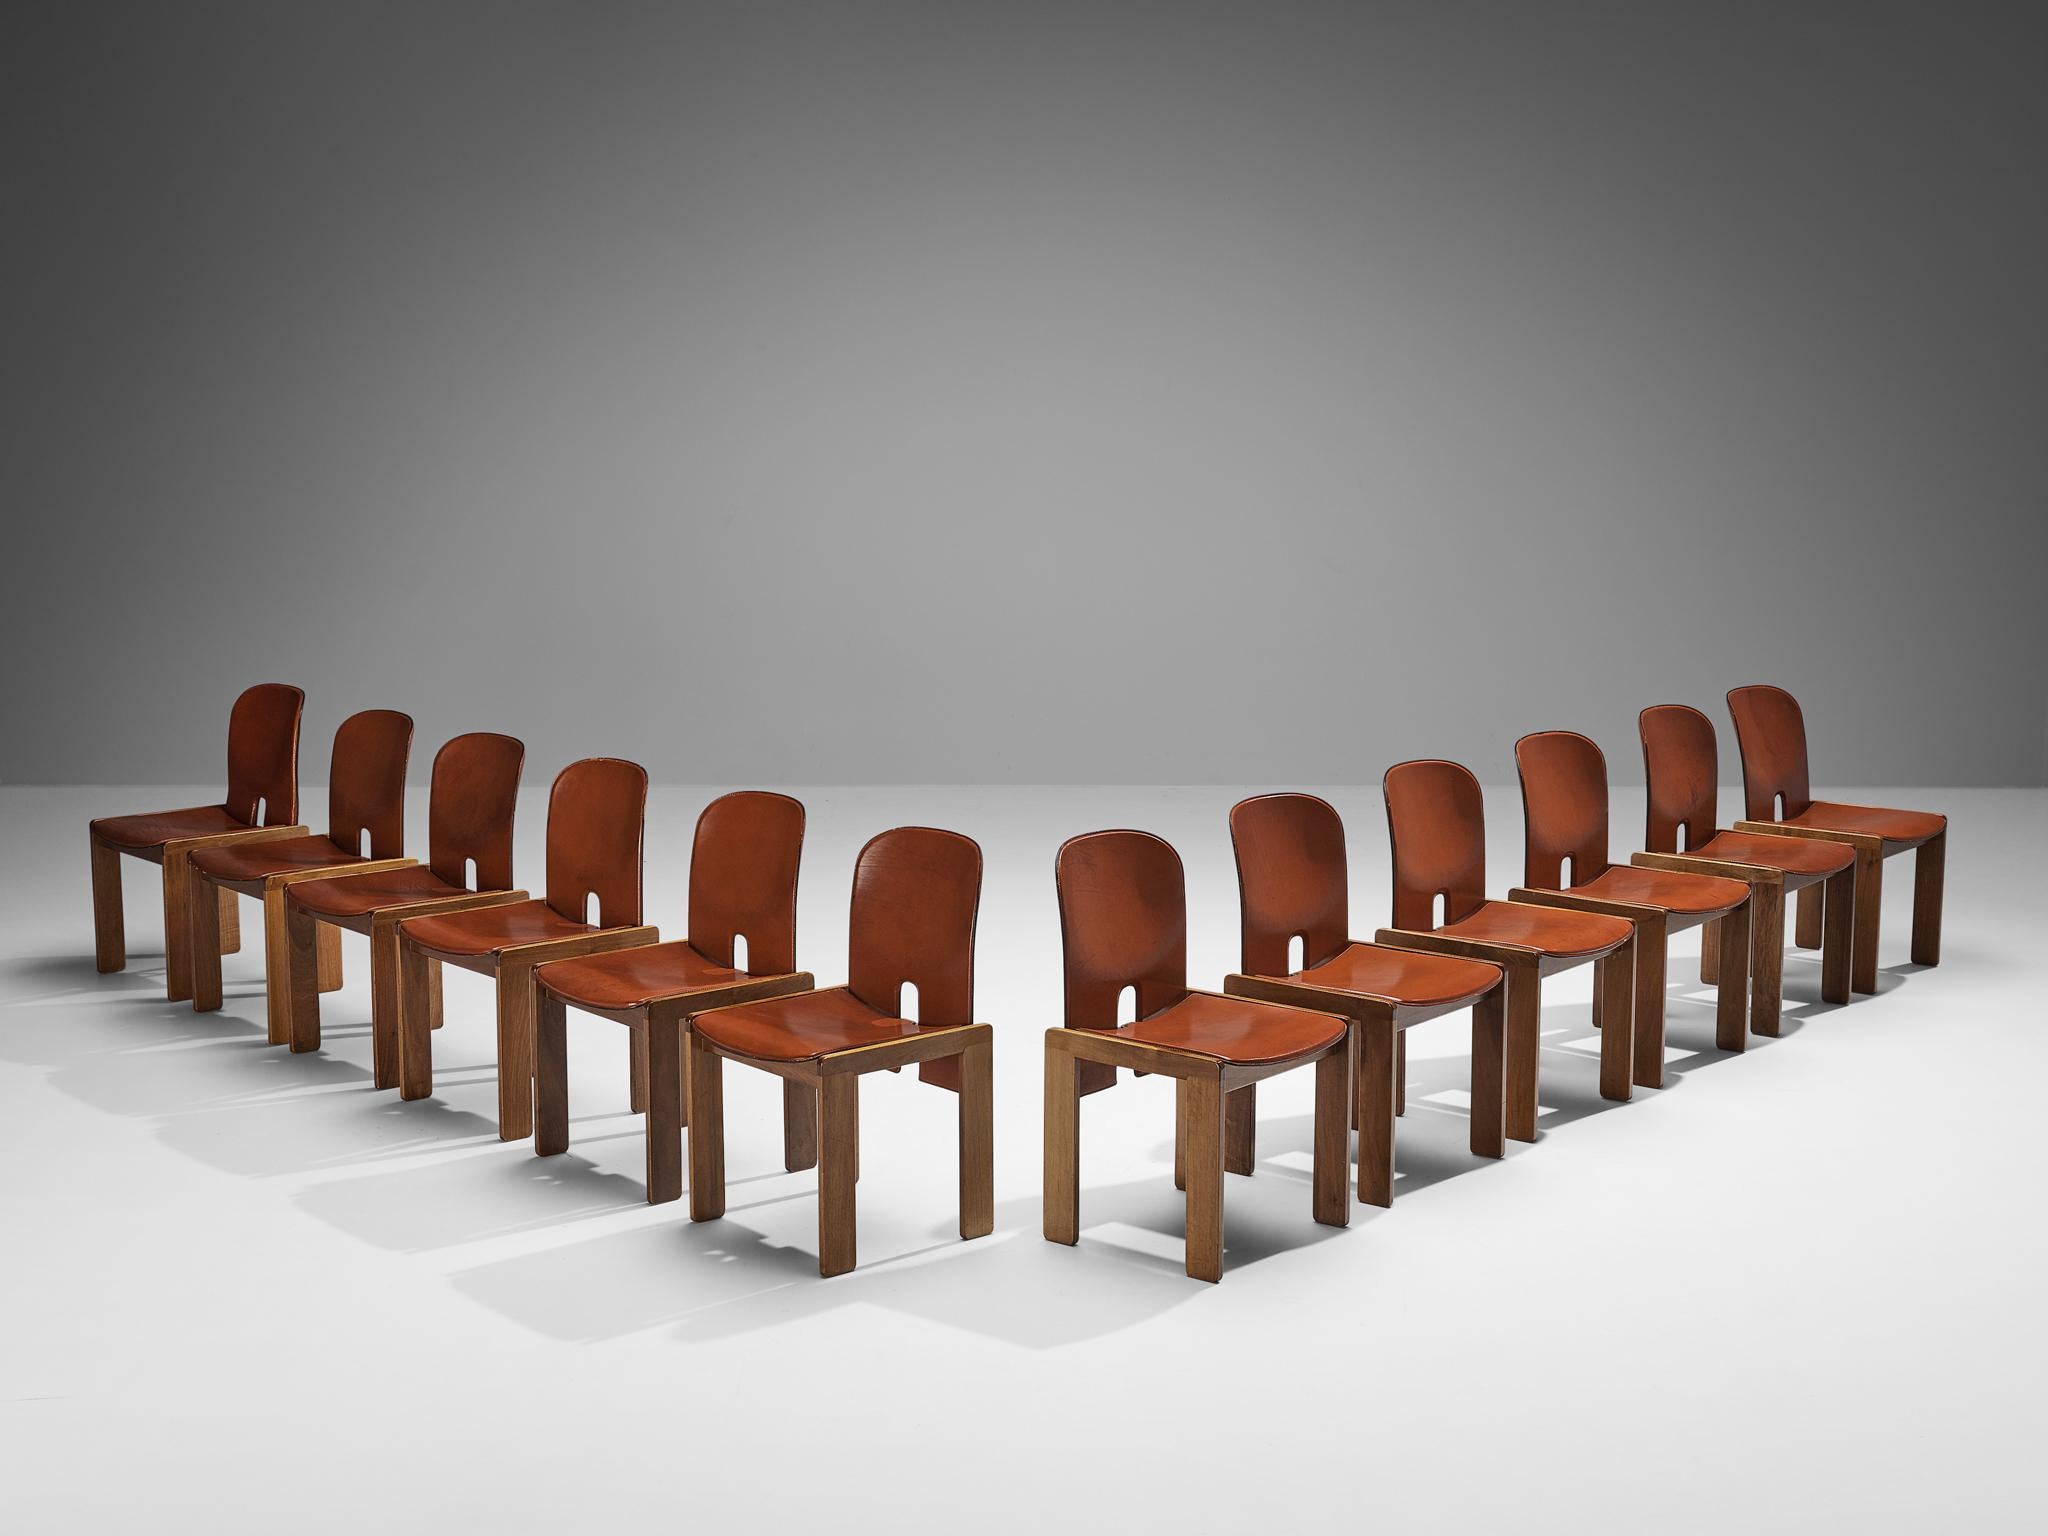 Afra & Tobia Scarpa for Cassina, set of twelve dining chairs model ‘121’, walnut, cognac leather, Italy, design 1965

Set of twelve dining chairs by the Italian designer couple Tobia and Afra Scarpa. These chairs have a cubic and architectural